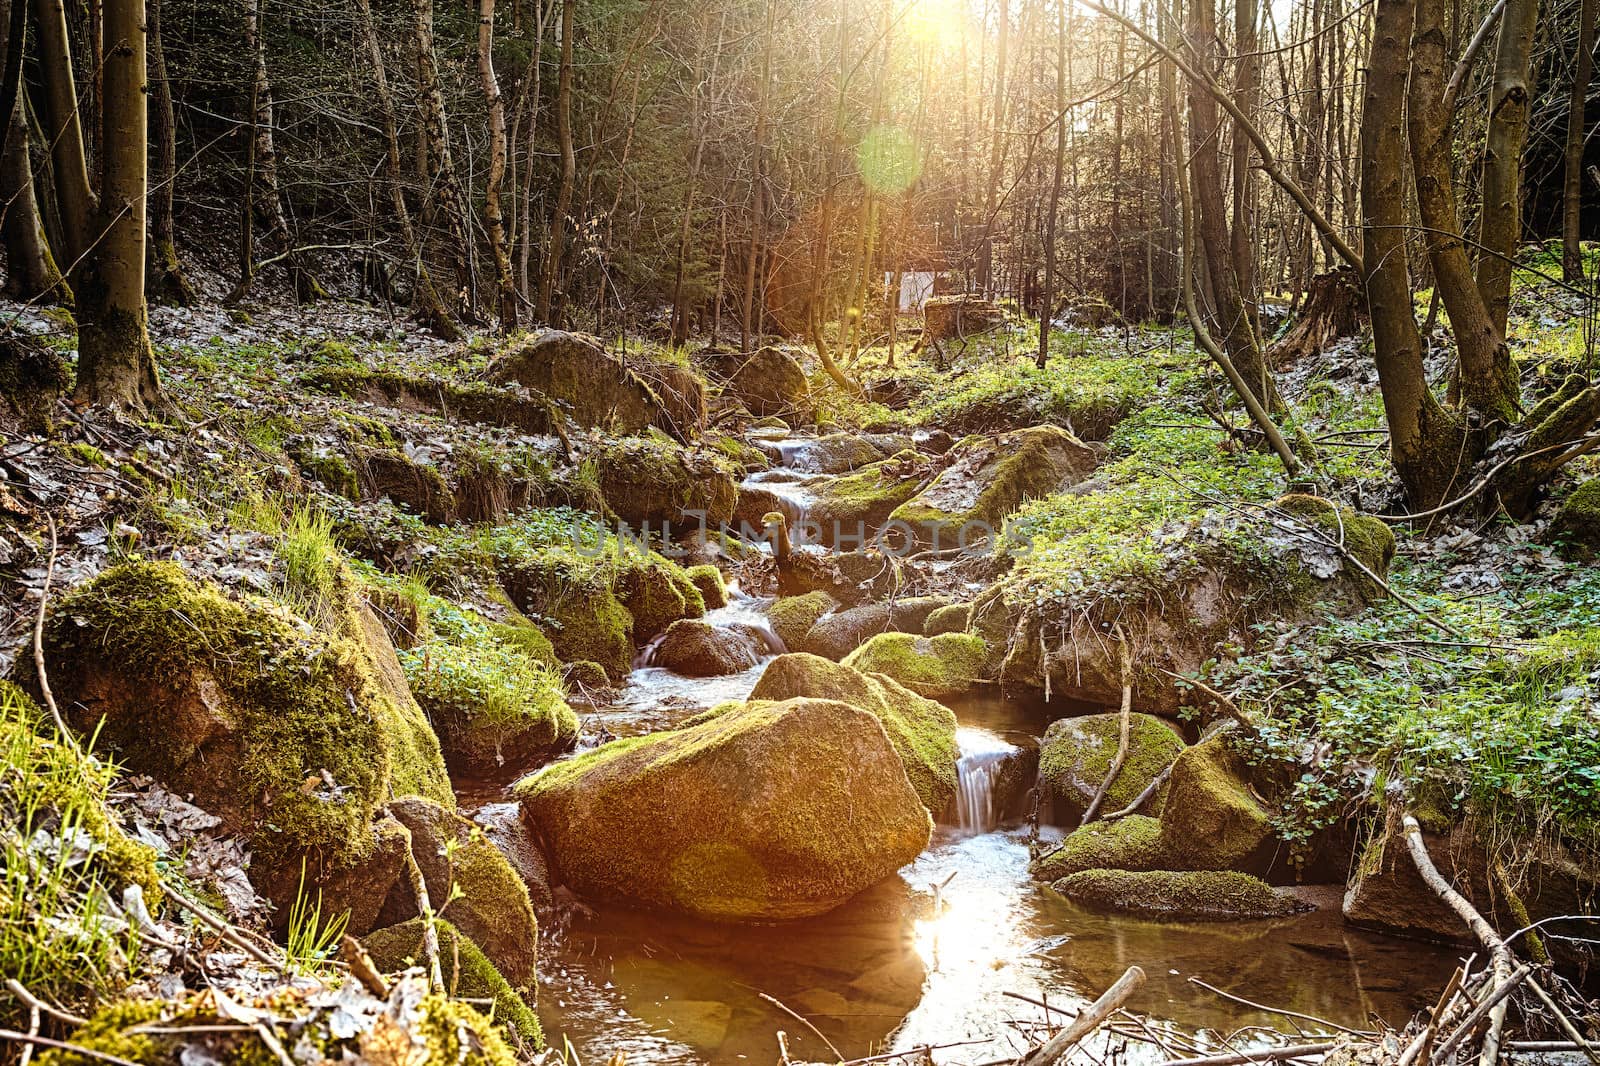 The river in the forest in the afternoon sun - HDR by hanusst